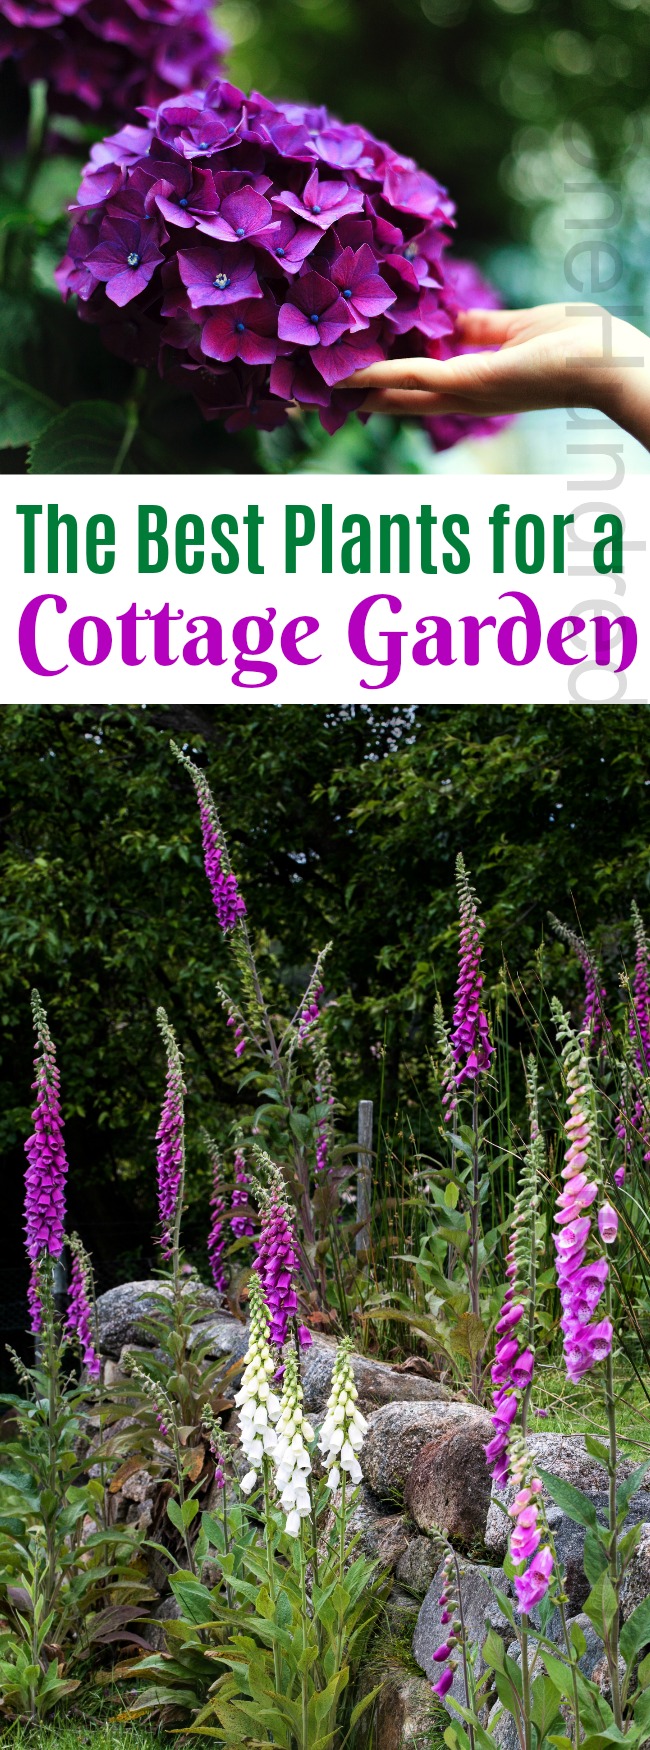 The Best Plants for a Cottage Garden